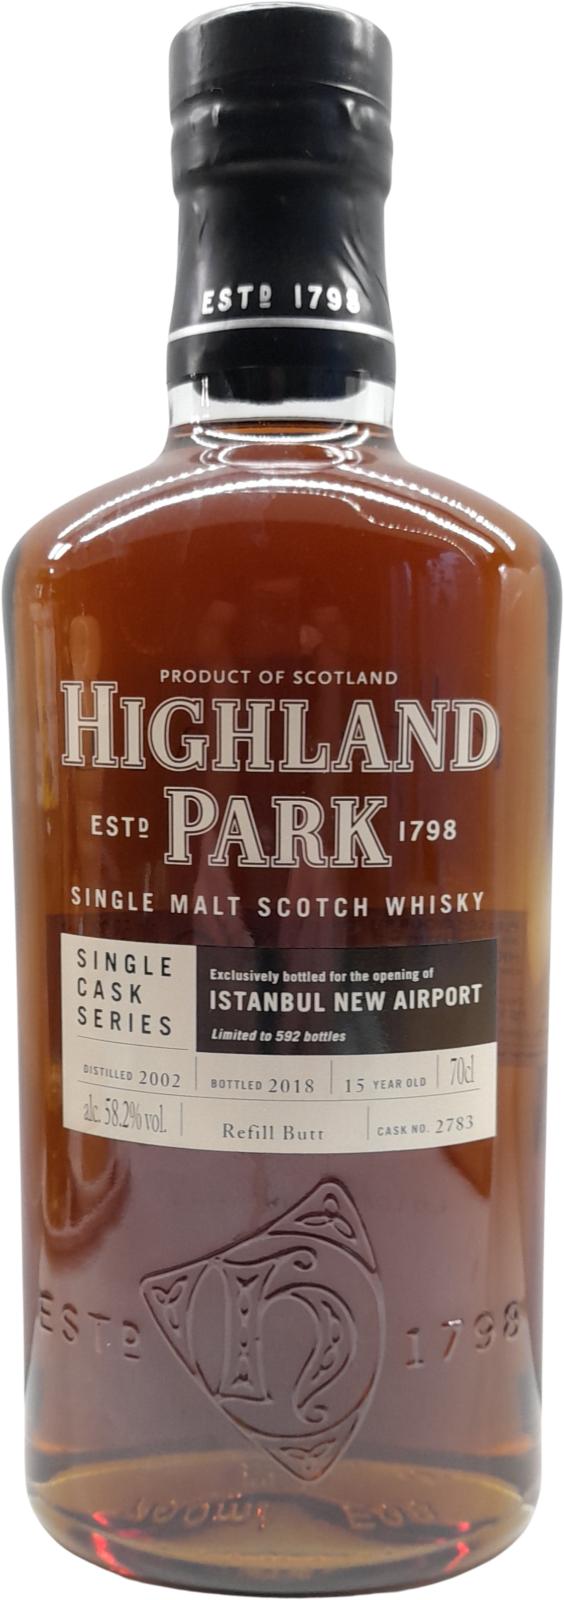 Highland Park 2002 Refill Butt #2783 Istanbul New Airport Exclusive 58.2% 700ml